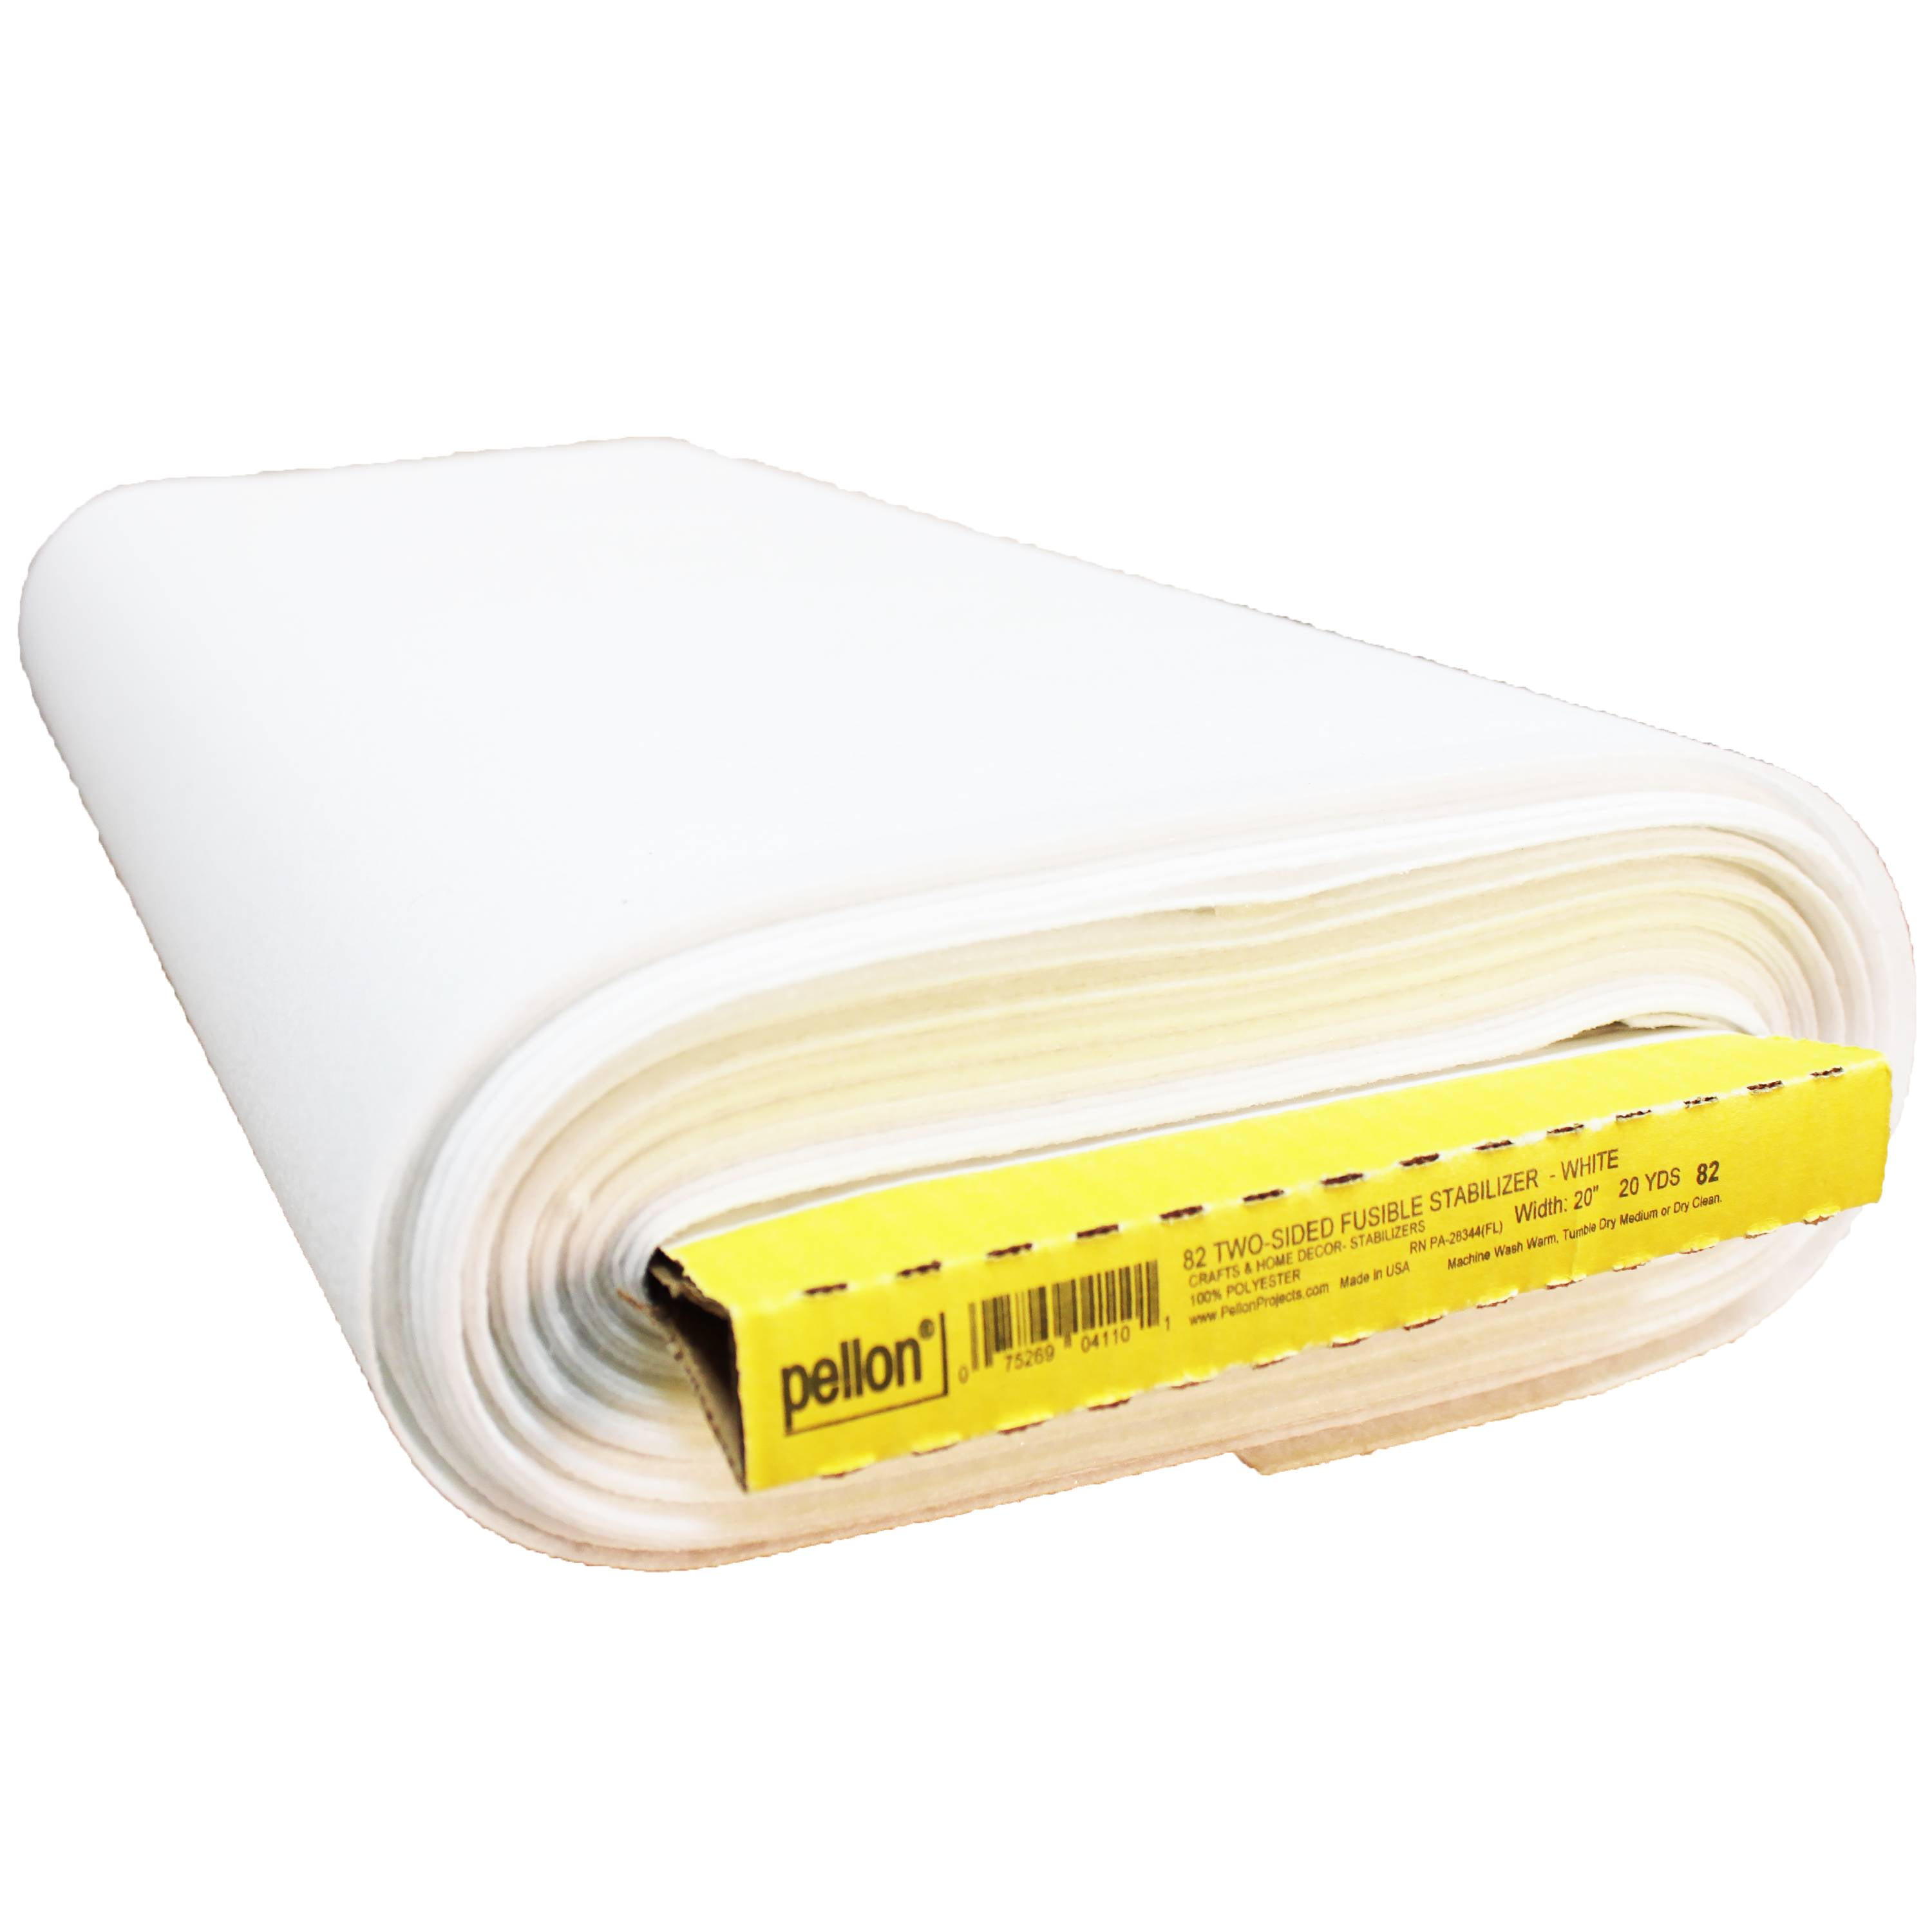 Pellon 911FF Fabric Interfacing, White 20 x 10 Yards by the Bolt. 1 Piece  